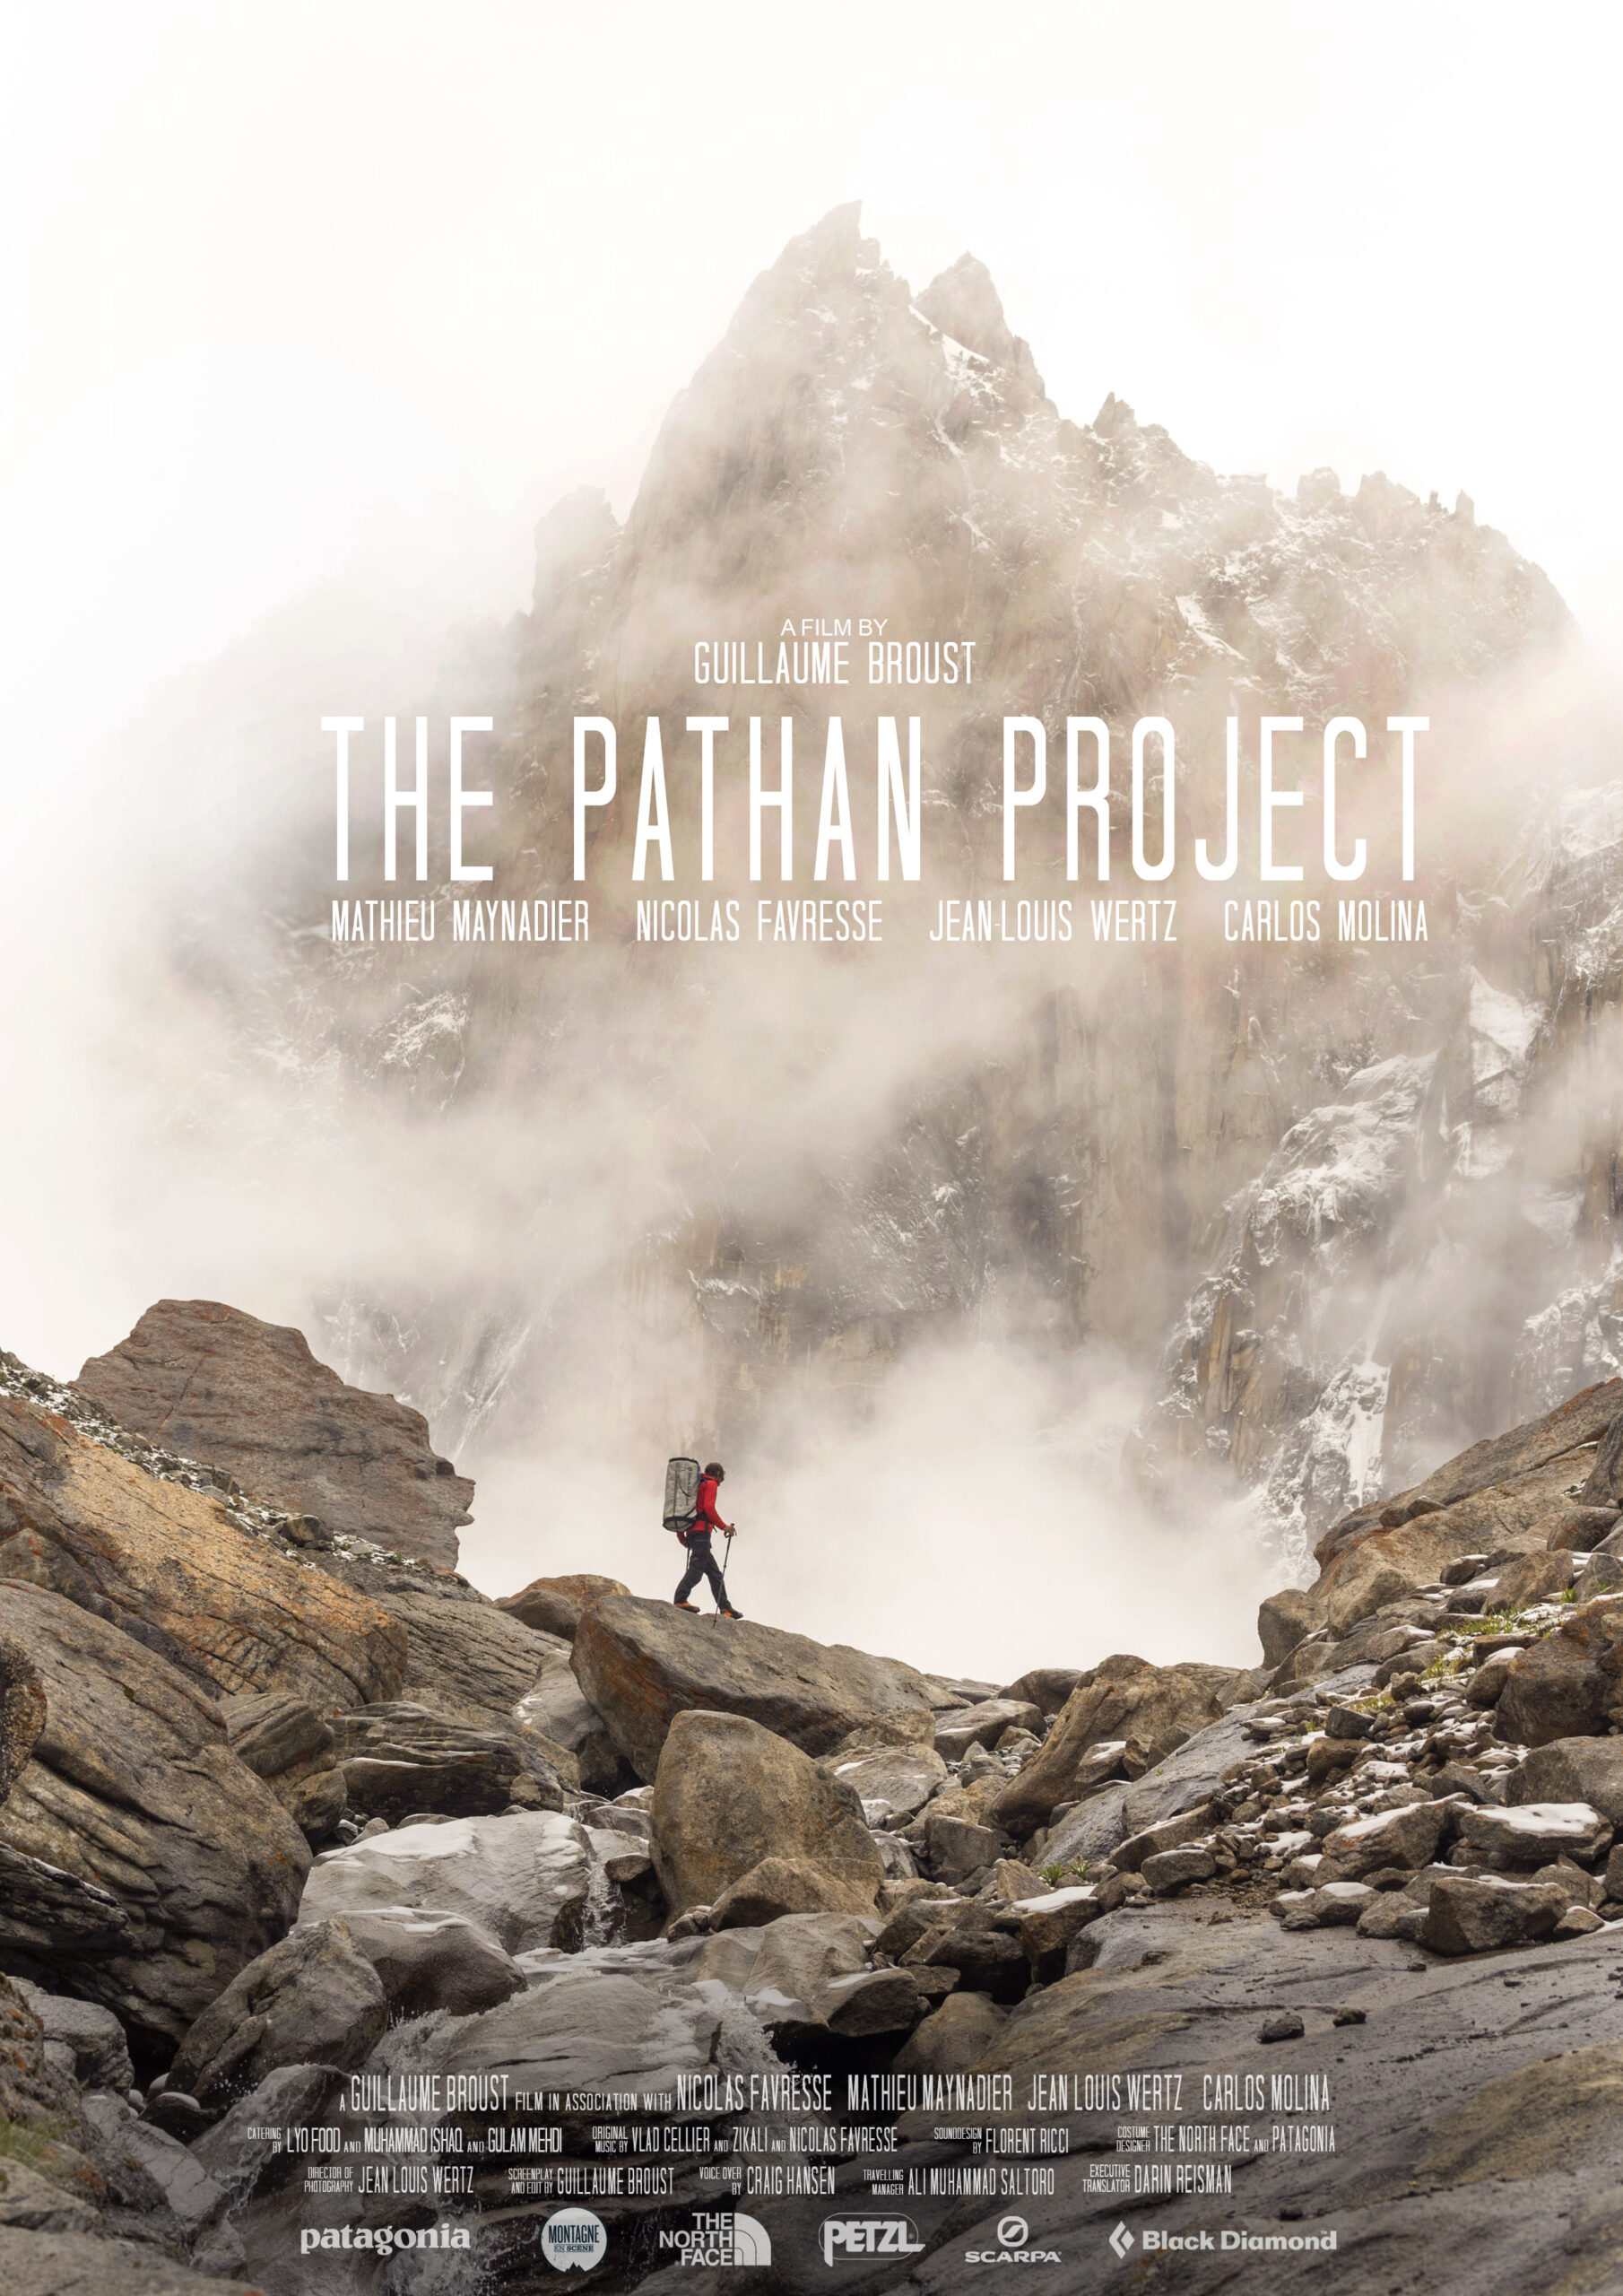 The Pathan Project - Winner of TMF 2019 | online in April